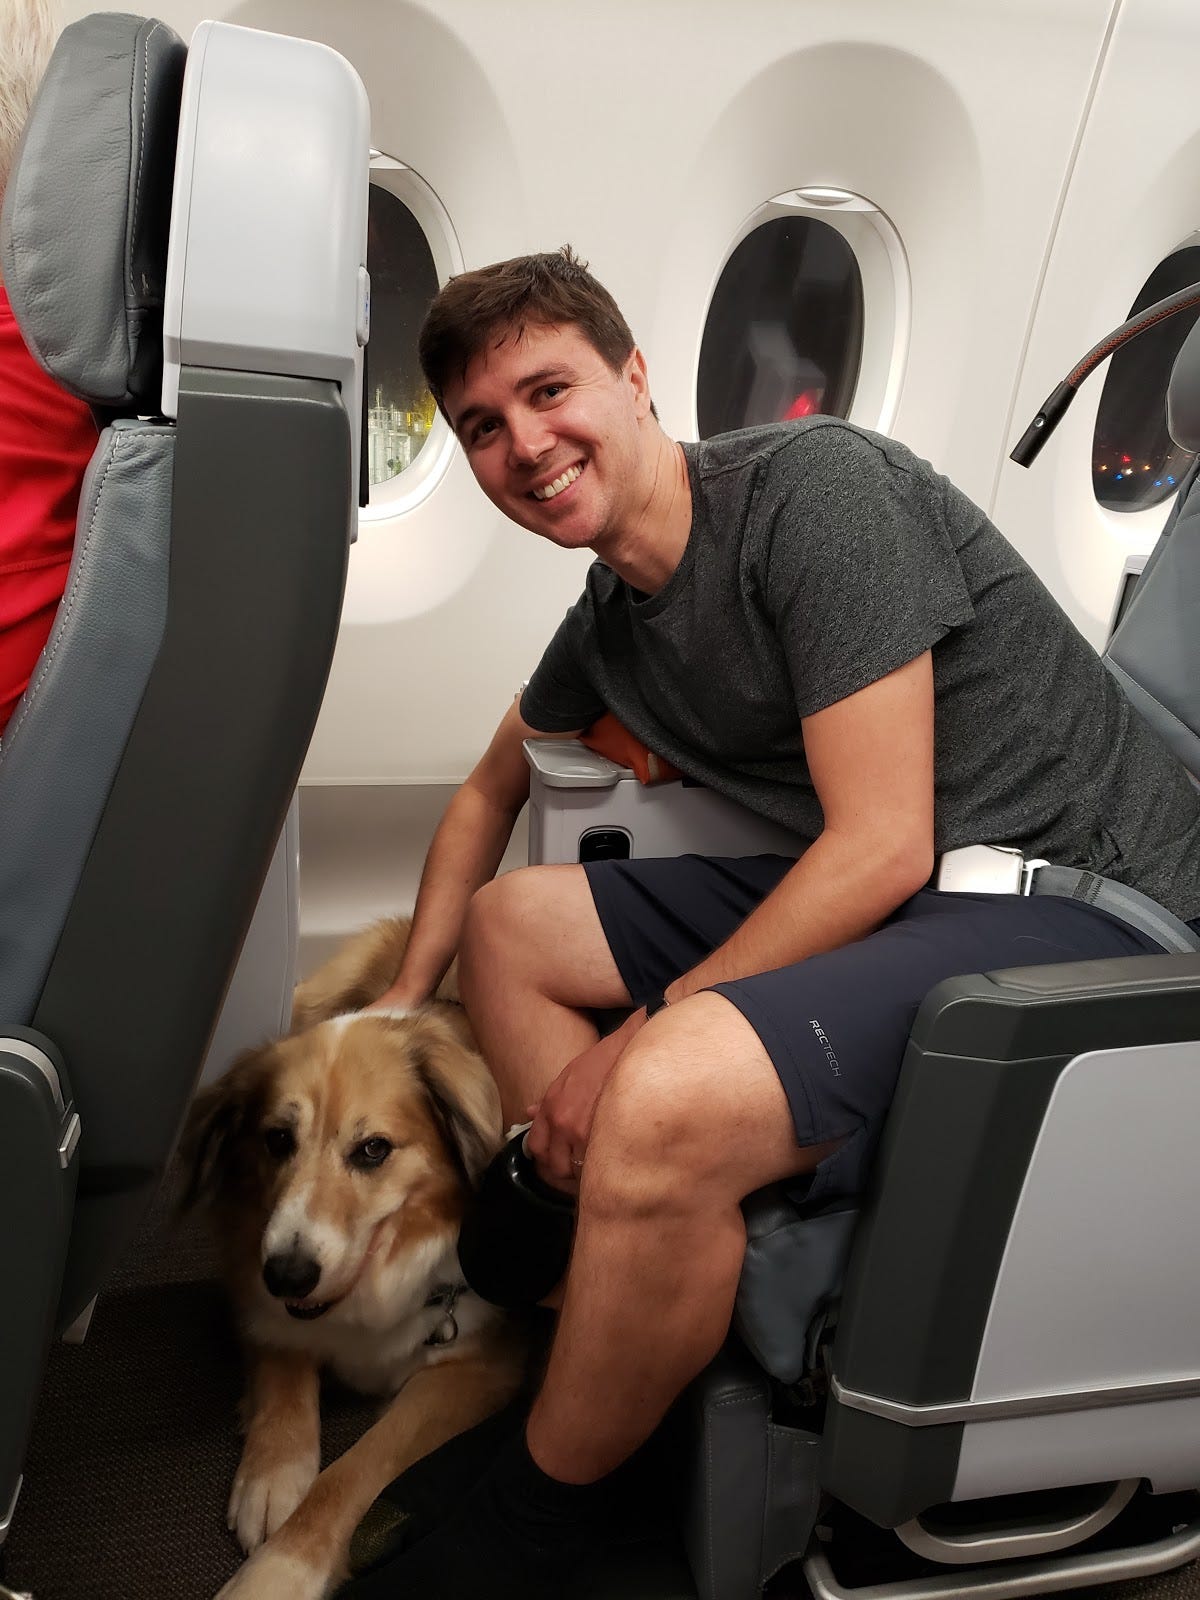 is it safe to fly a puppy on a plane